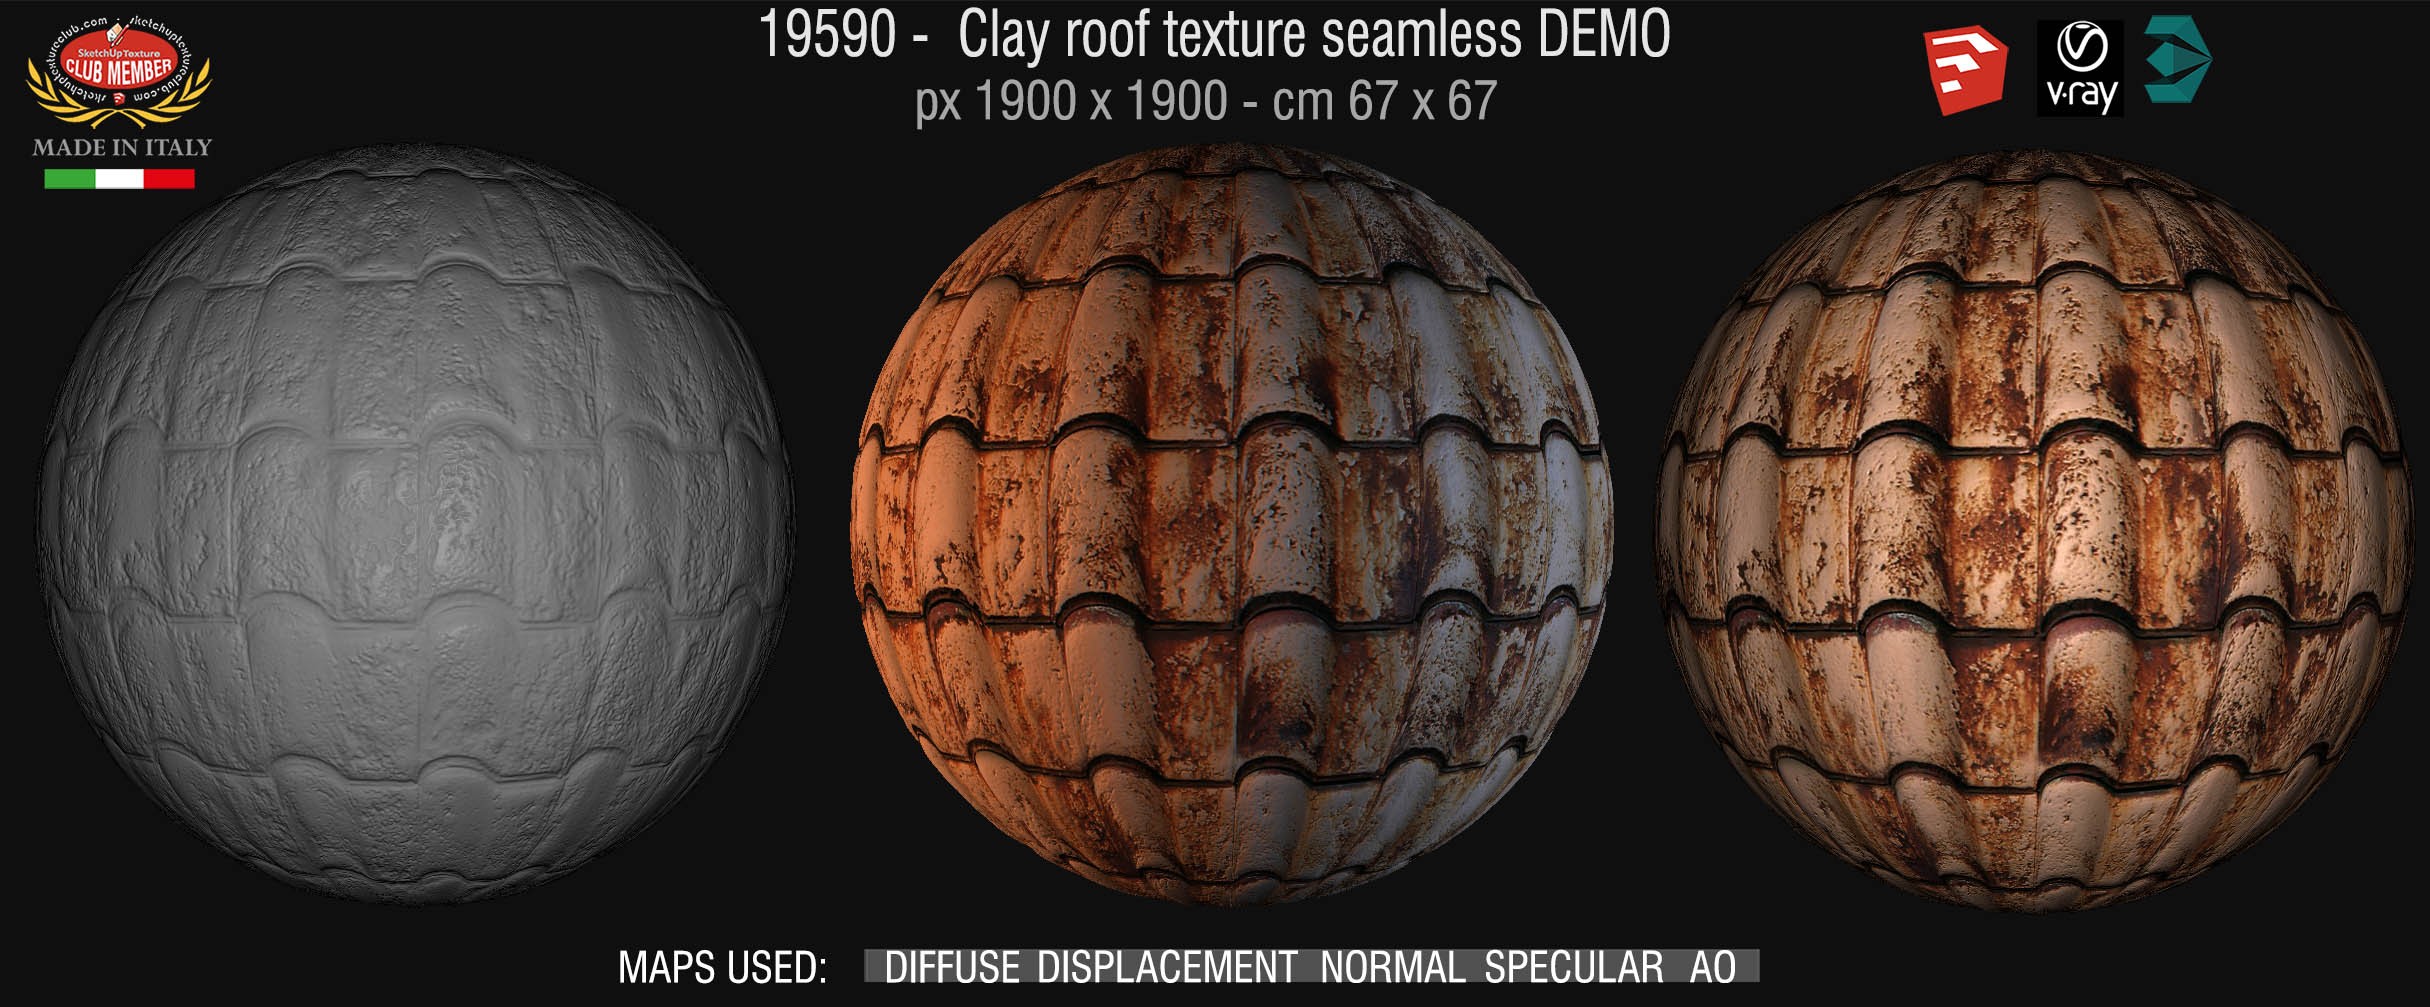 19590 Clay roof texture seamless + maps DEMO